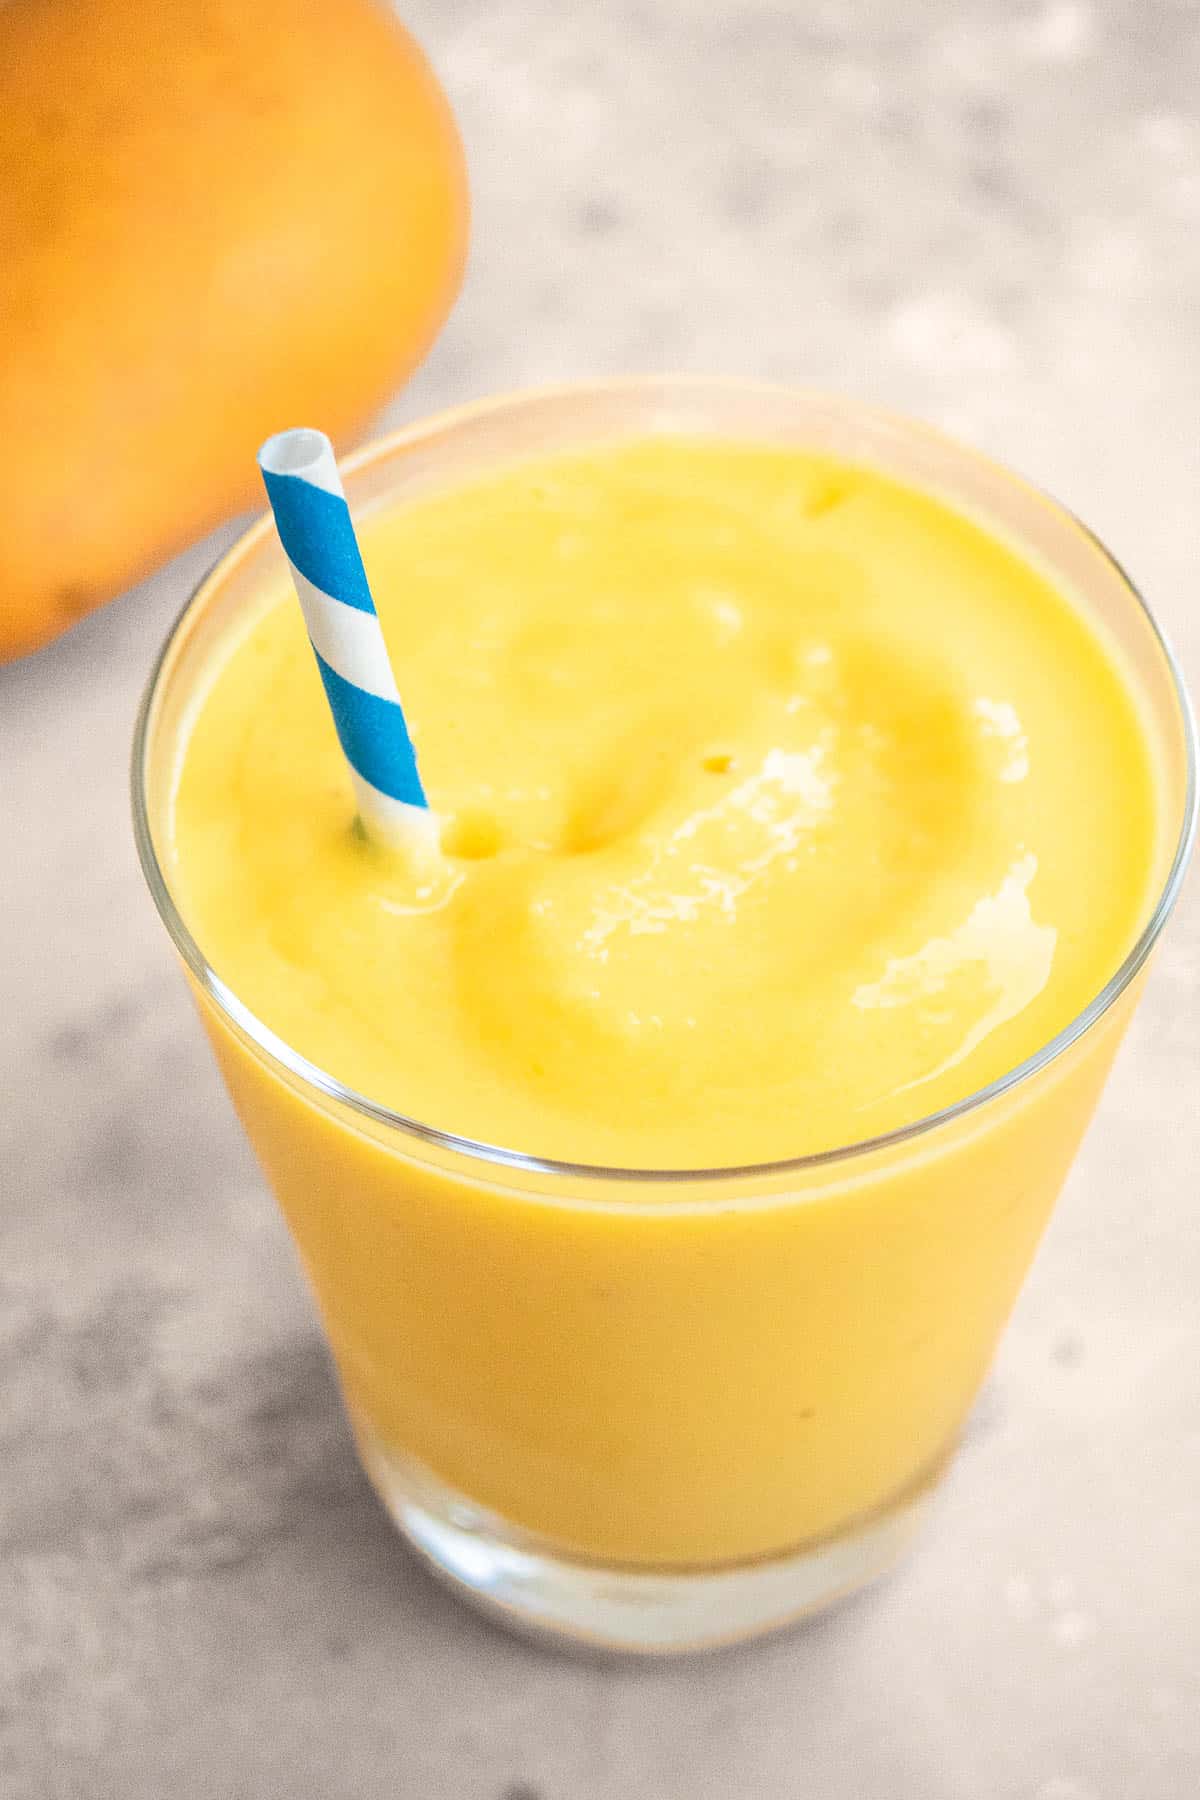 Recipe: Tasty Smoothies - 100 Days of Real Food